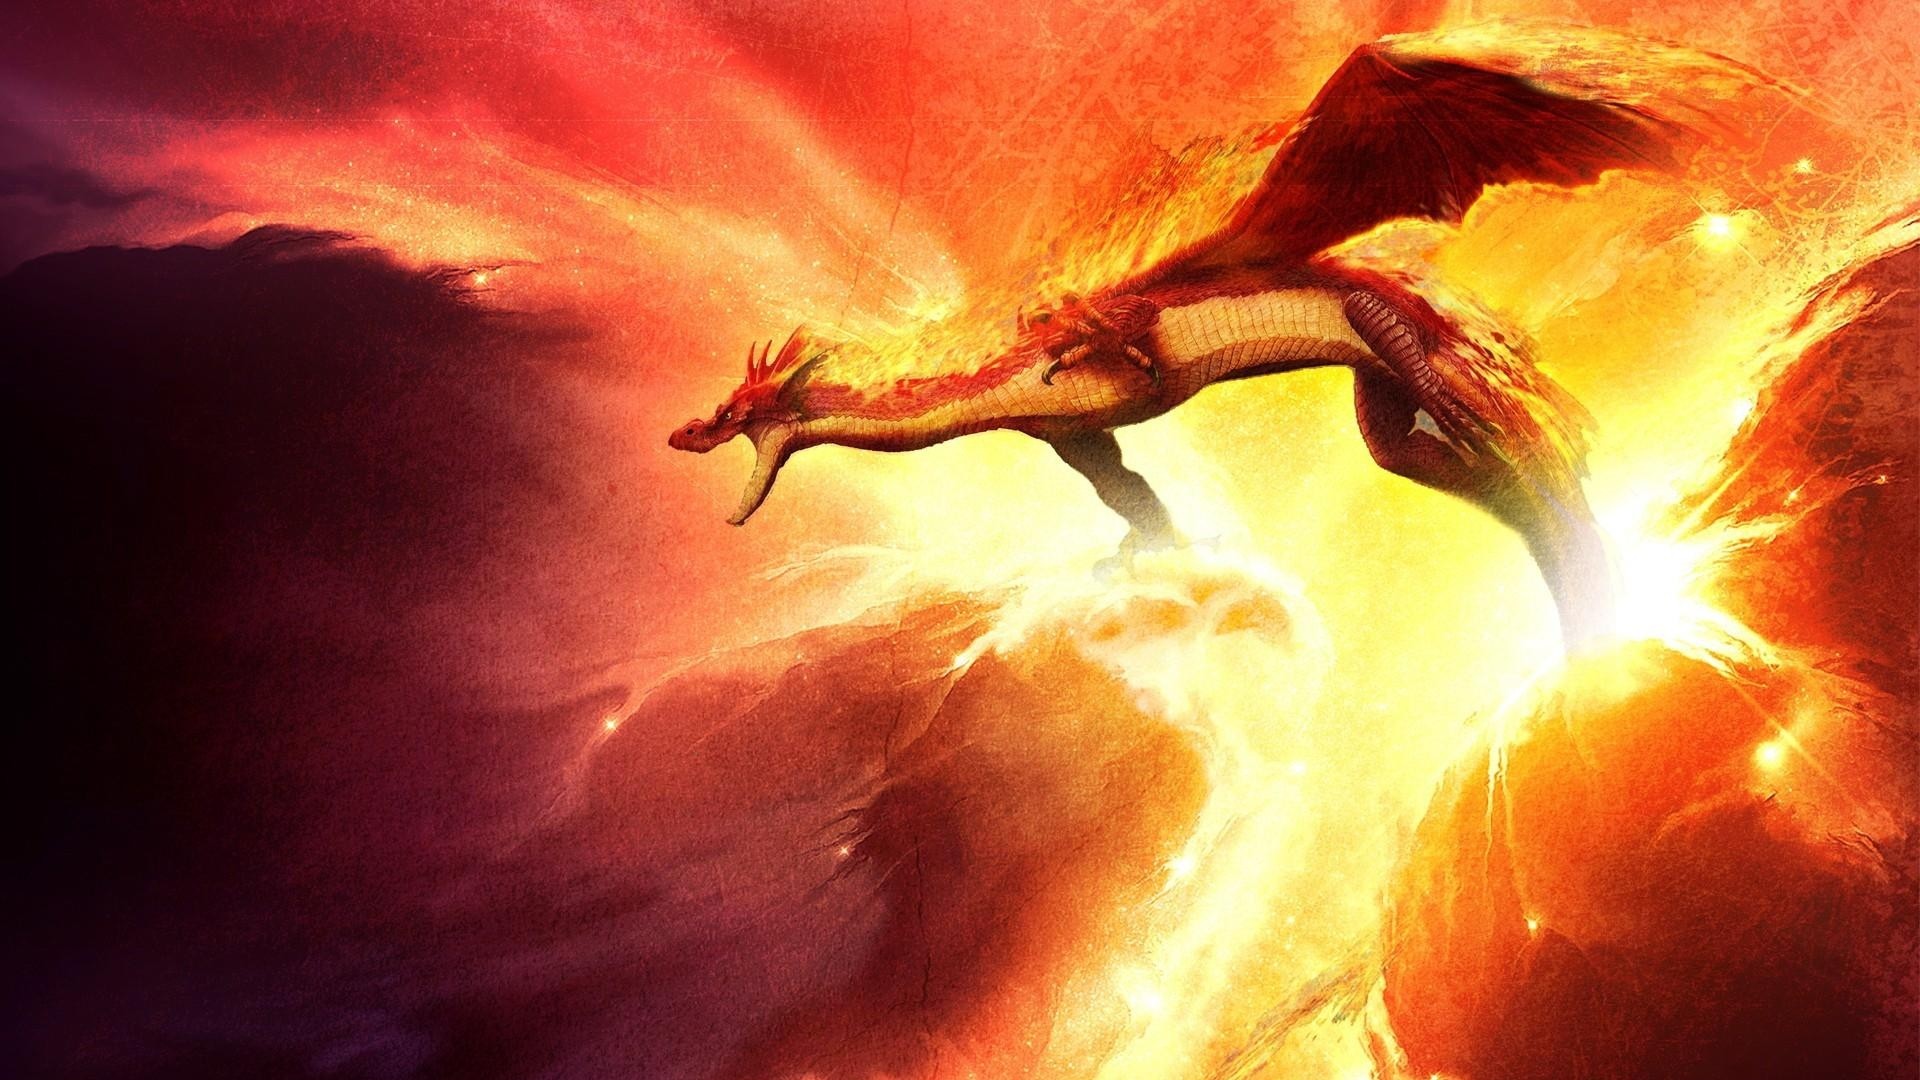 1920x1080 ... Background Full HD 1080p.  Wallpaper dragon, fire, sparkles,  mouth